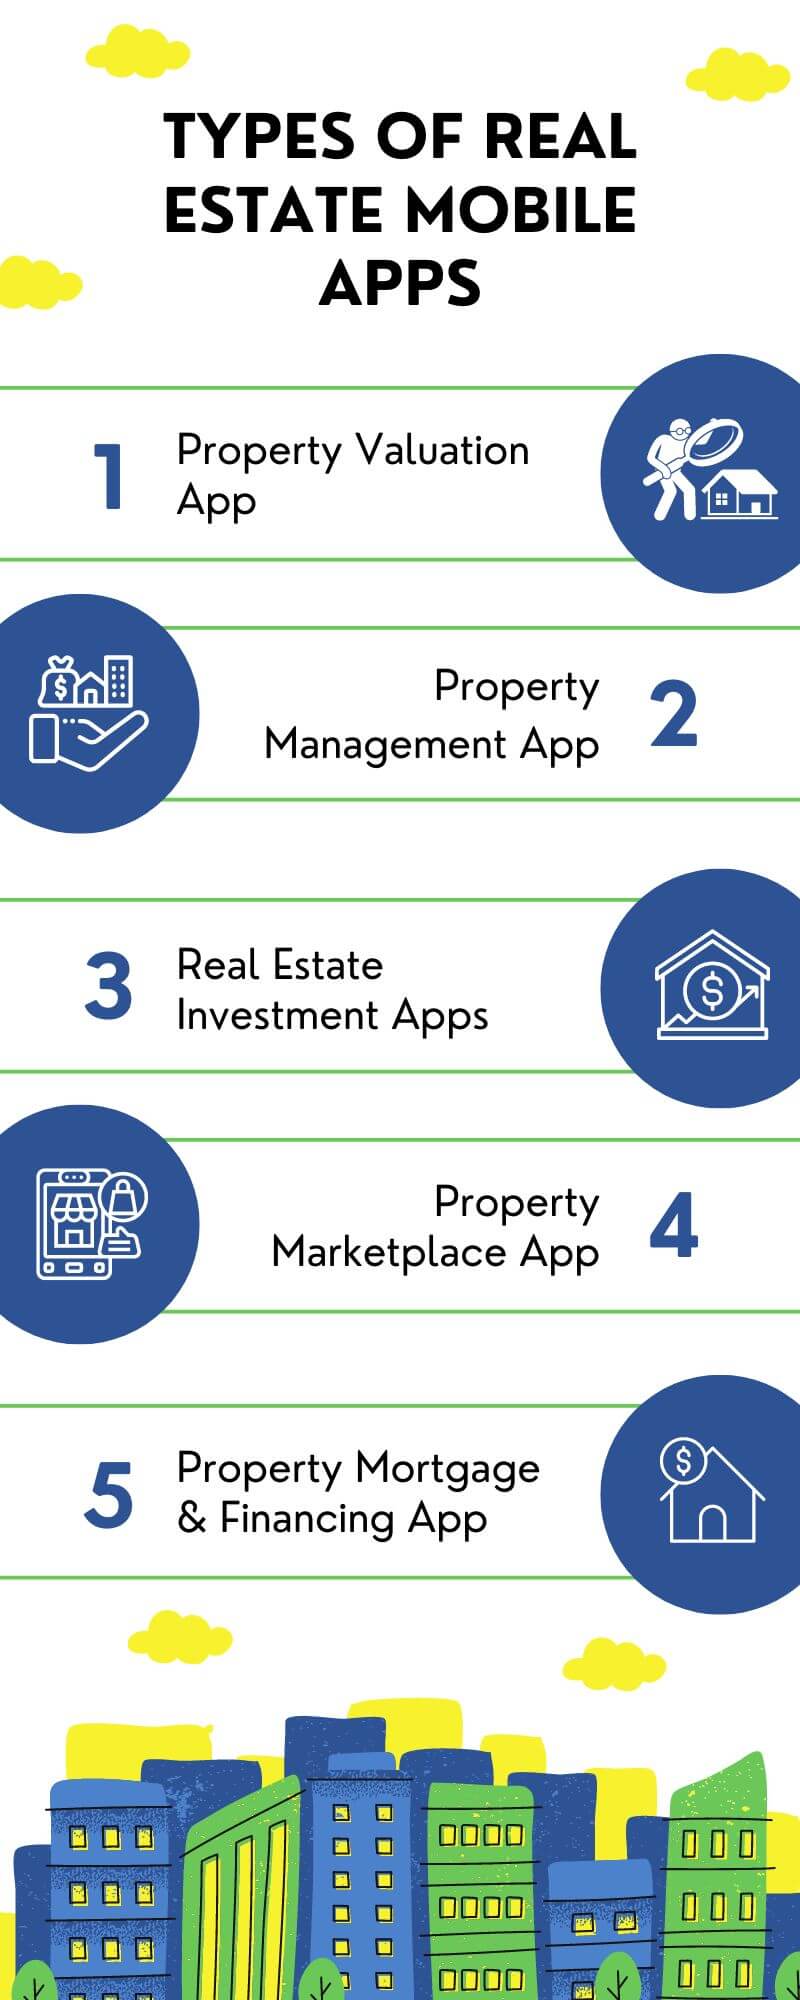 Types of Real Estate Mobile Apps